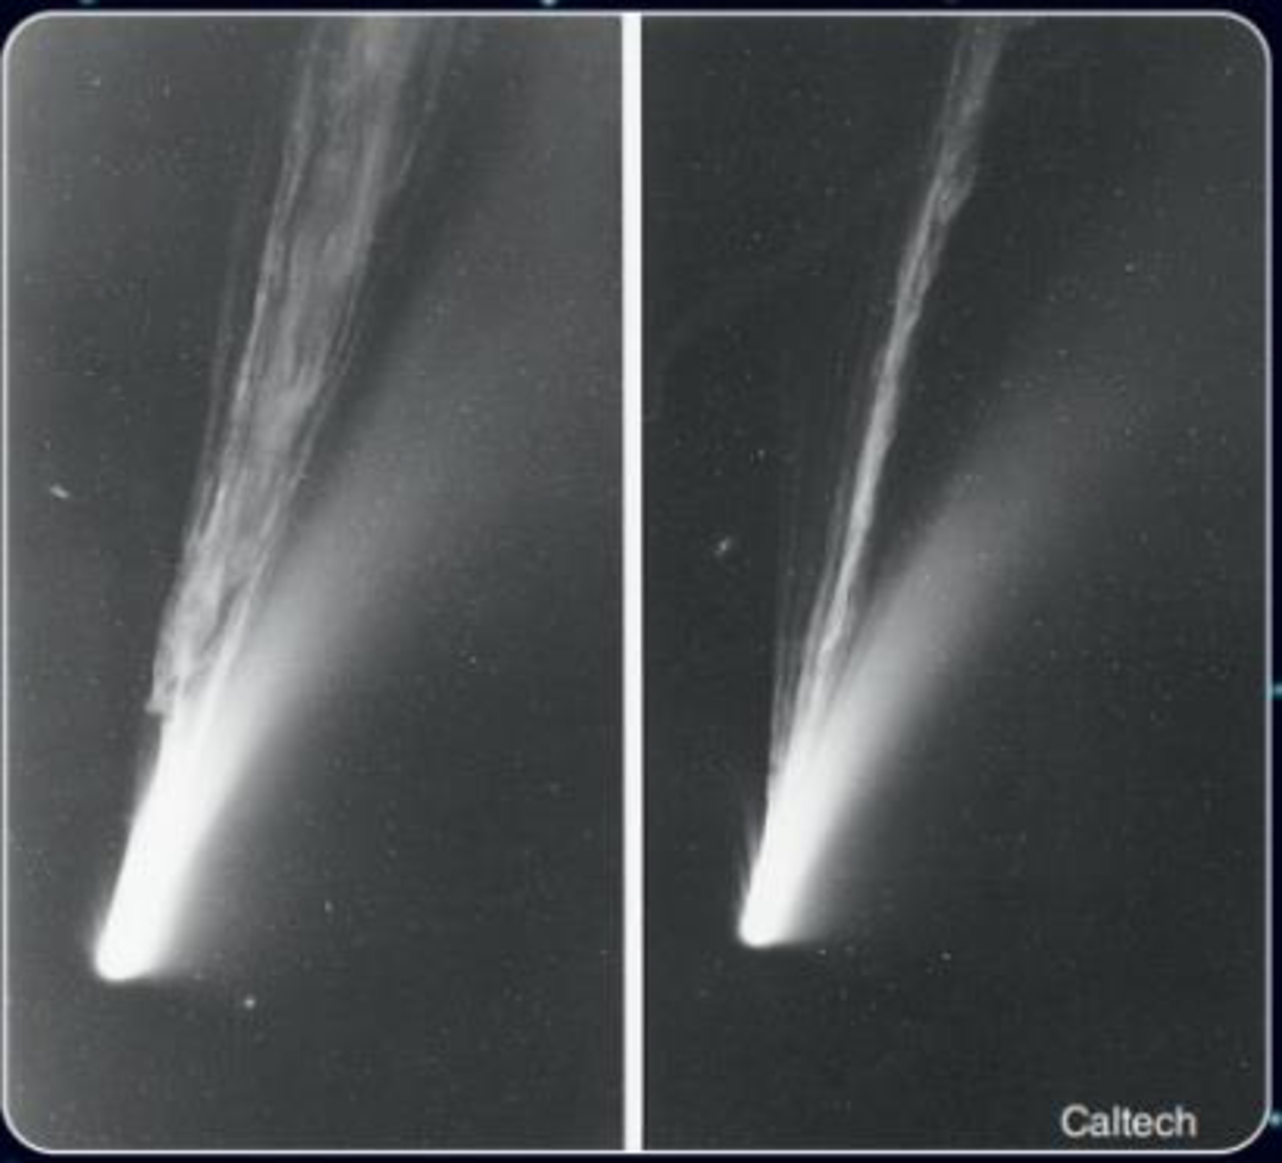 Chapter 24, Problem 4LTL, Look at the images of Comet Mrkos on the left page of Concept Art: Observations of Comets. Is the 